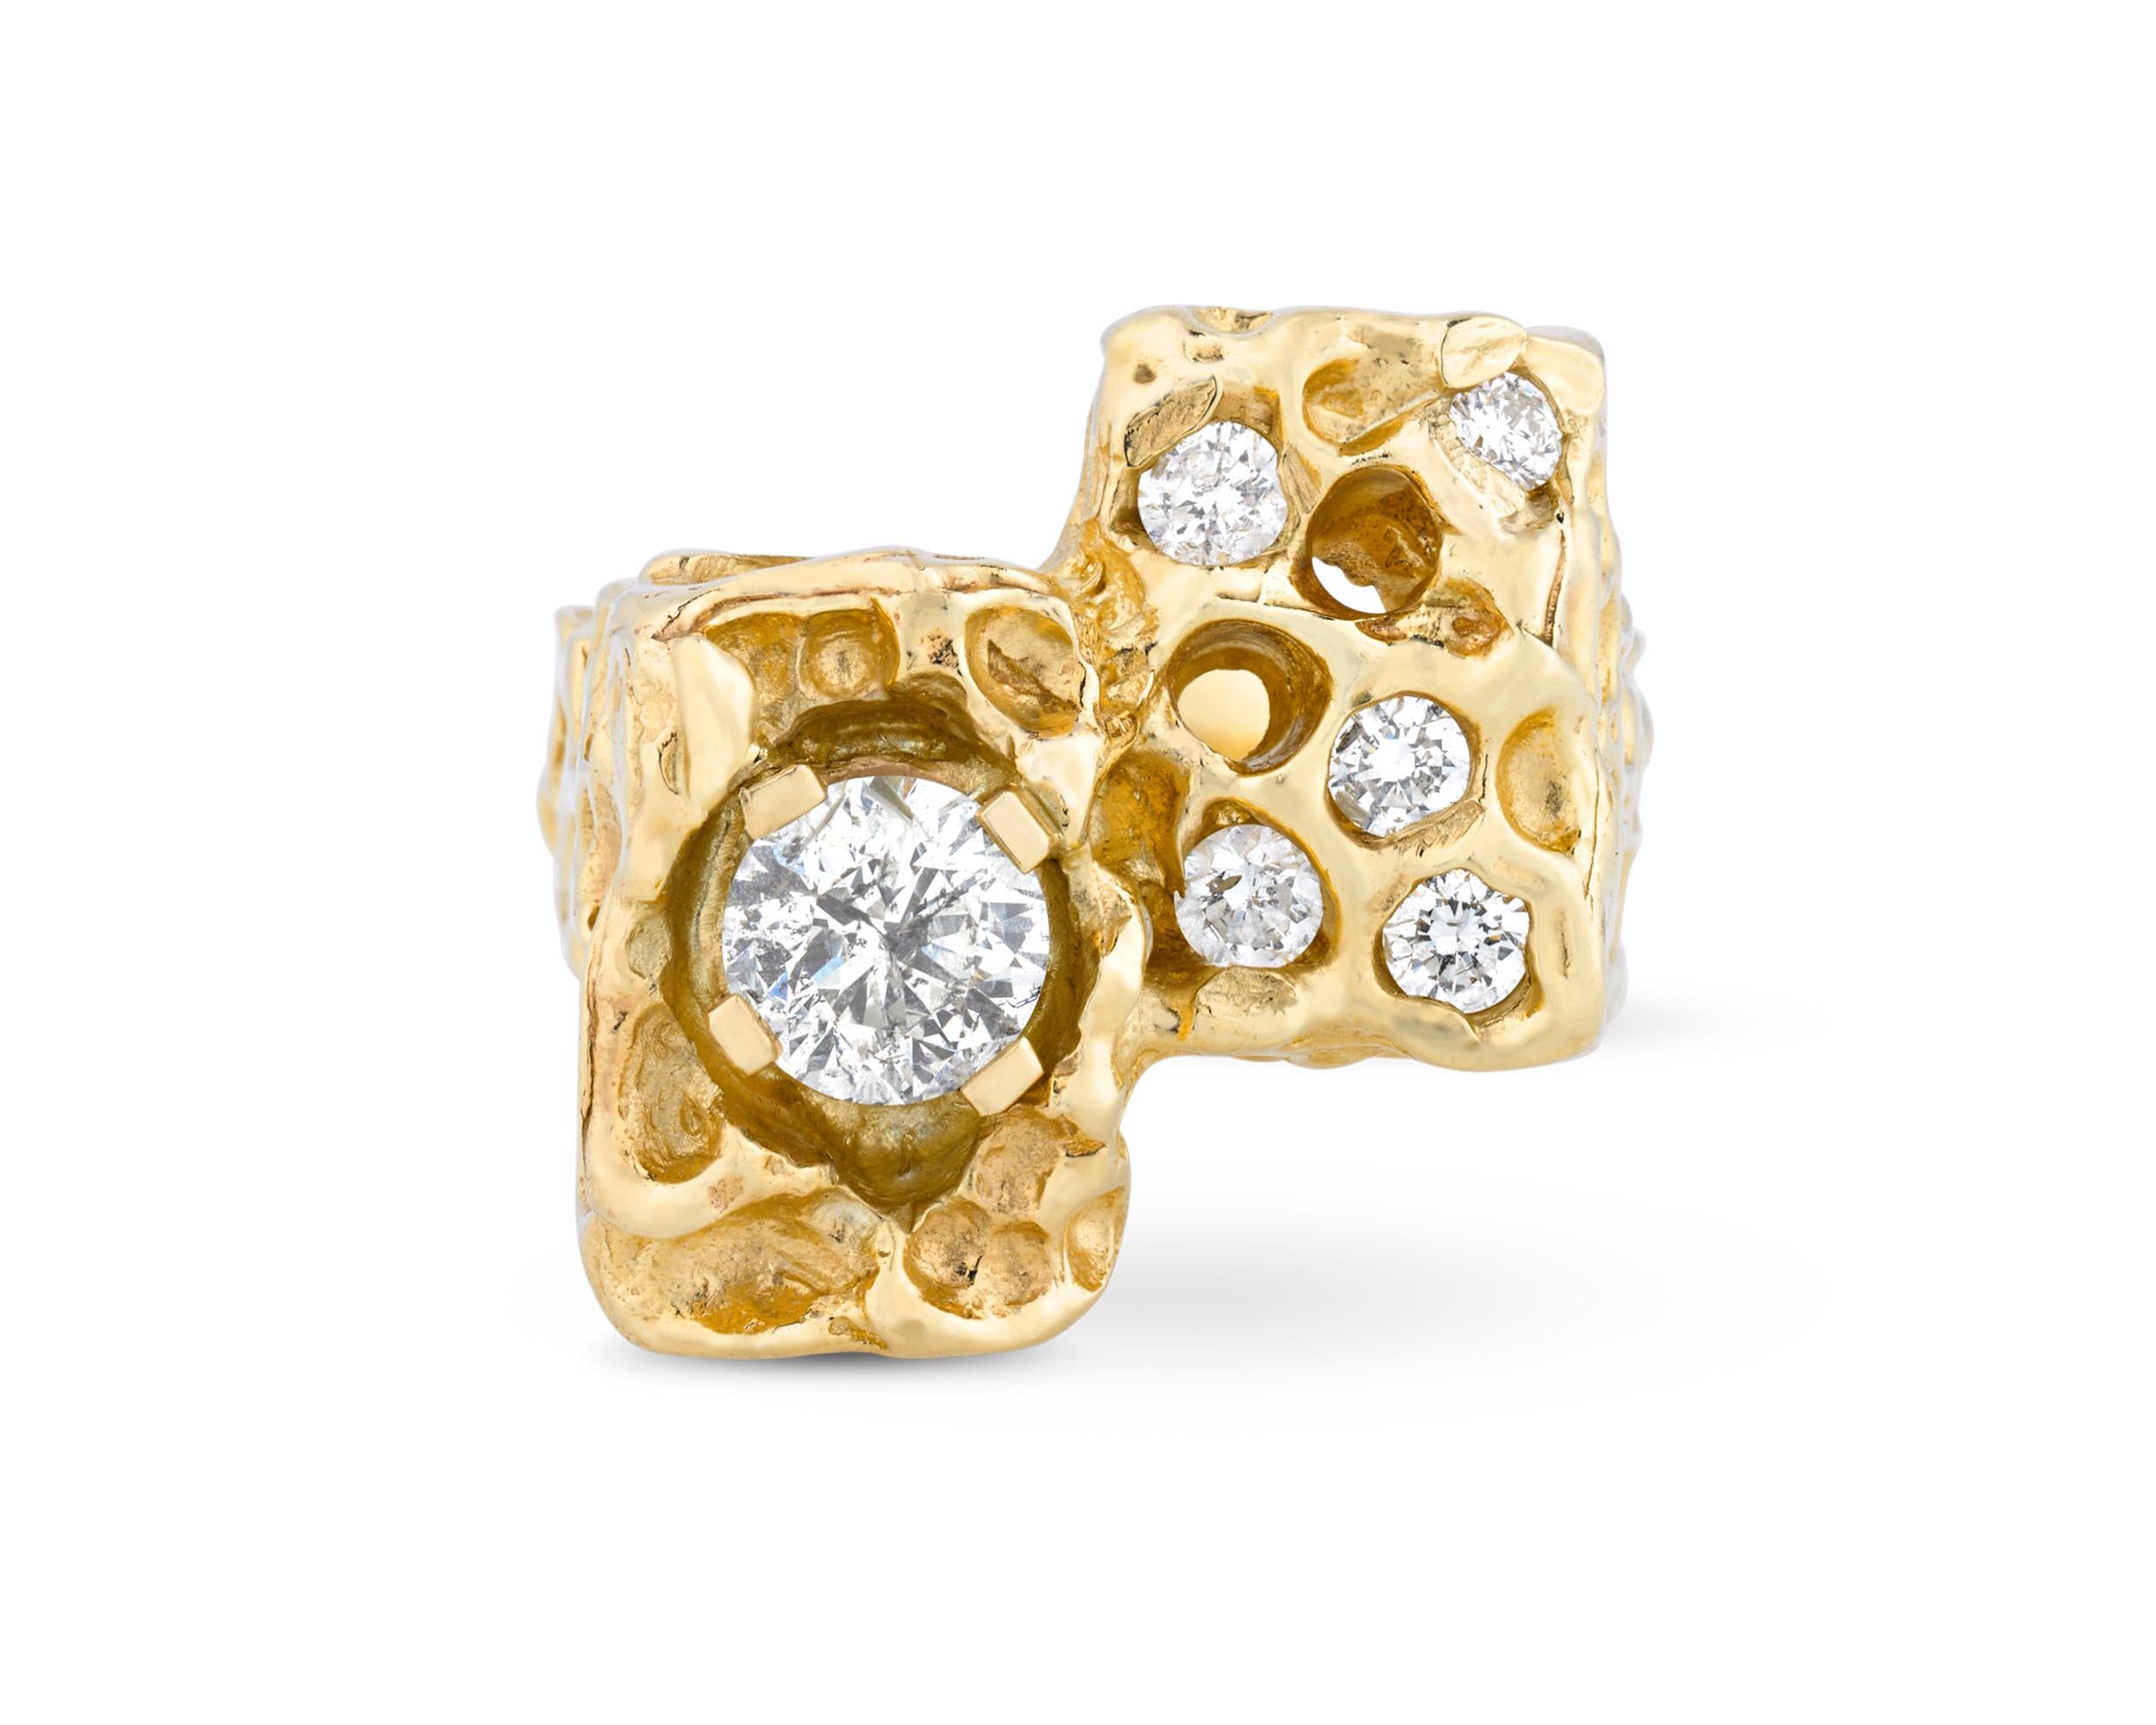 This ring was once owned and worn by one of the most celebrated cultural icons of the 20th century, Elvis Presley. Crafted from hammered 14K yellow gold, the impressive ring's highly sculptural form is inset with six white diamond accents, the